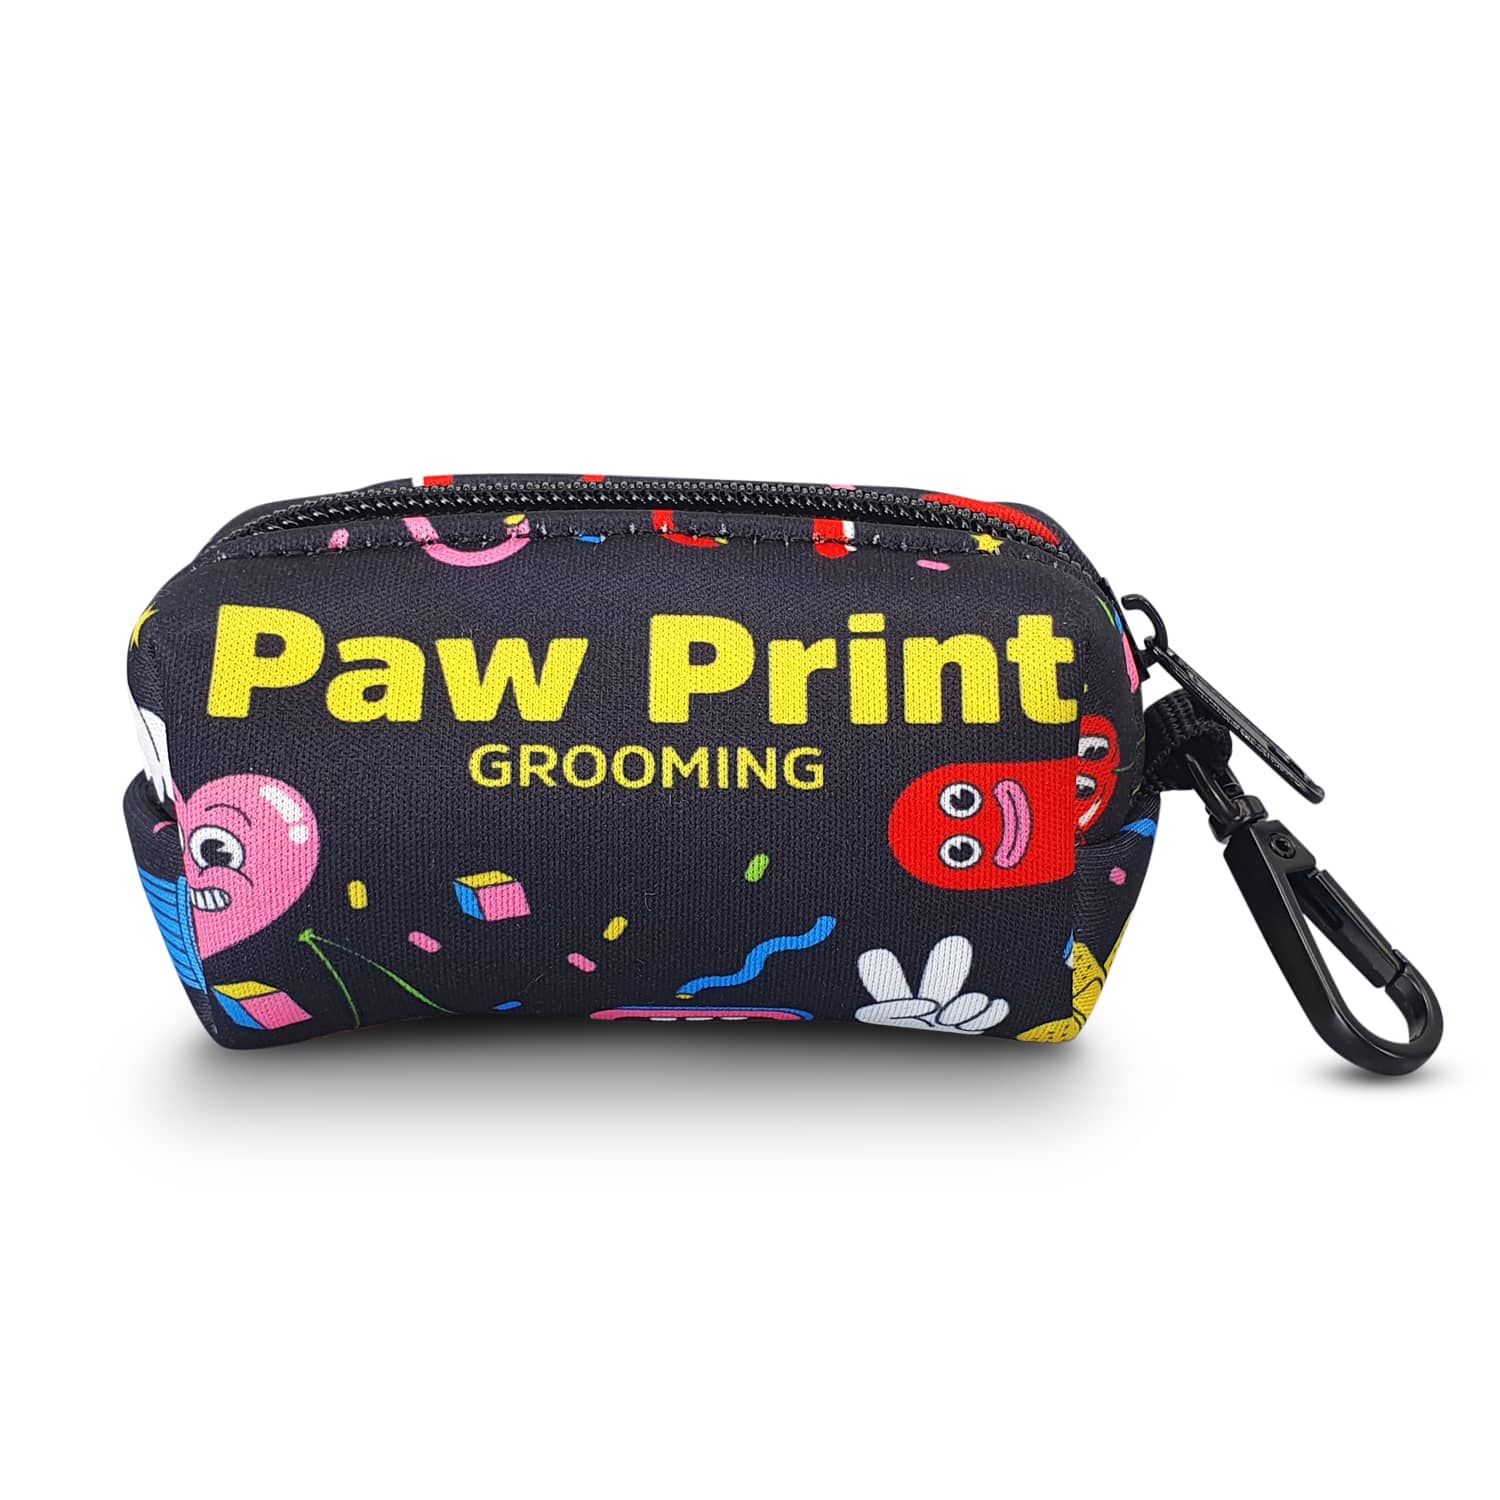 Amigo Pet Bag Dispenser | Custom Pet Bag Dispenser | Pet Bag Dispensers | Customised Pet Bag Dispenser | Personalised Pet Bag Dispenser | Custom Merchandise | Merchandise | Customised Gifts NZ | Corporate Gifts | Promotional Products NZ | Branded merch